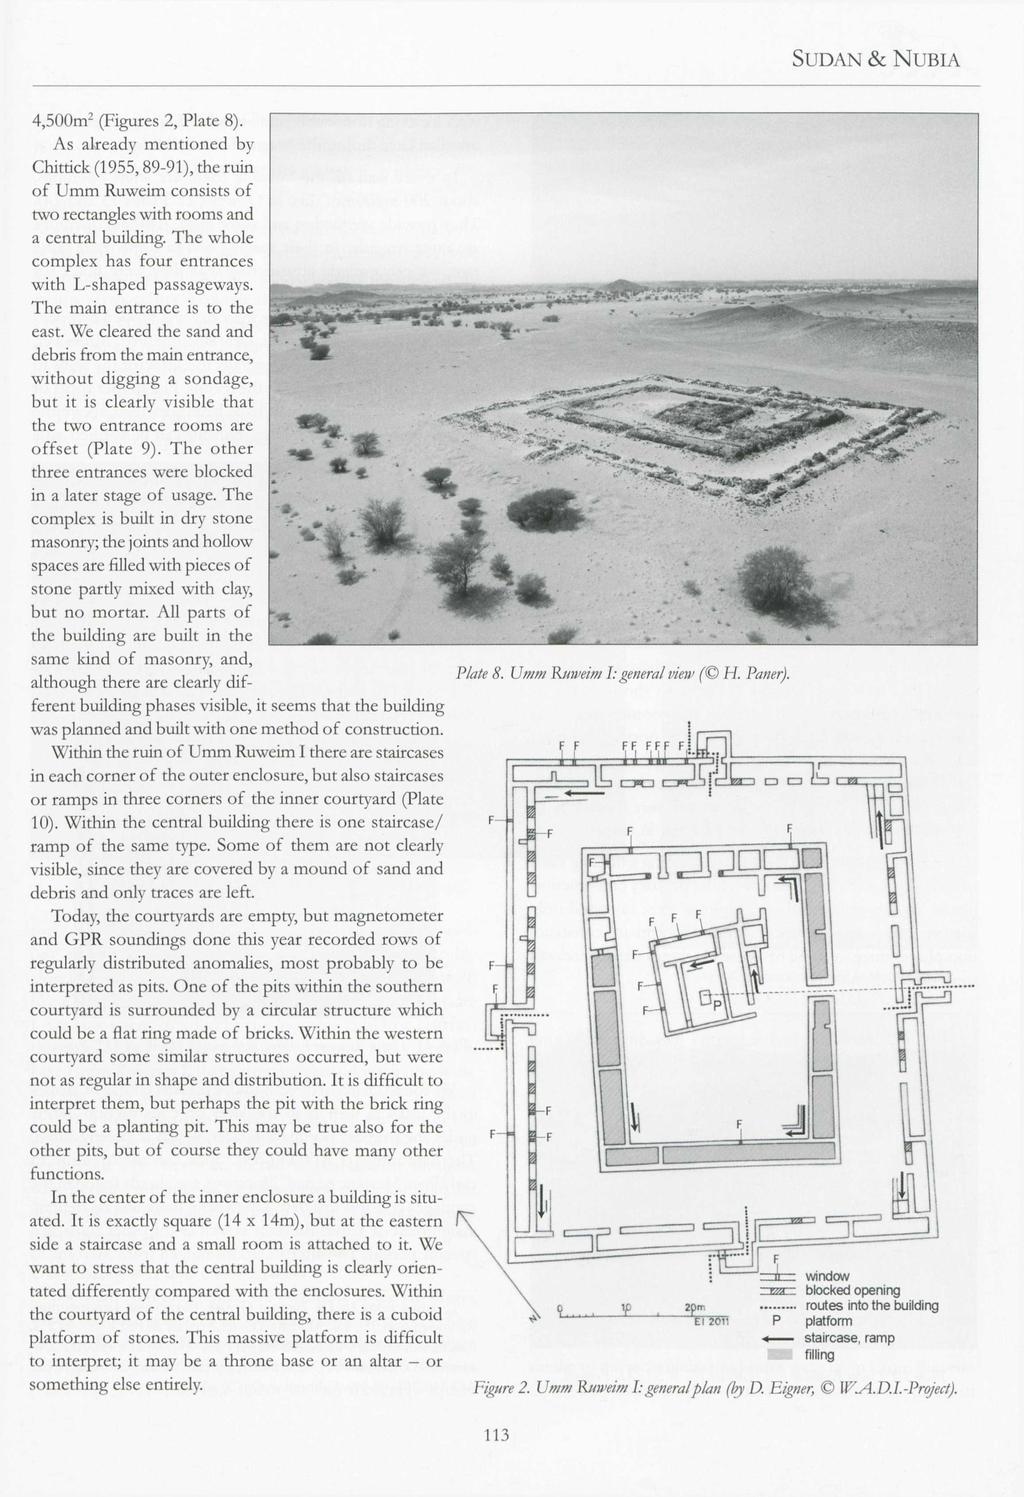 SUDAN & NUBIA 4,500m 2 (Figures 2, Plate 8). As already mentioned by Chittick (1955,89-91), the ruin of Umm Ruweim consists of two rectangles with rooms and a central building.